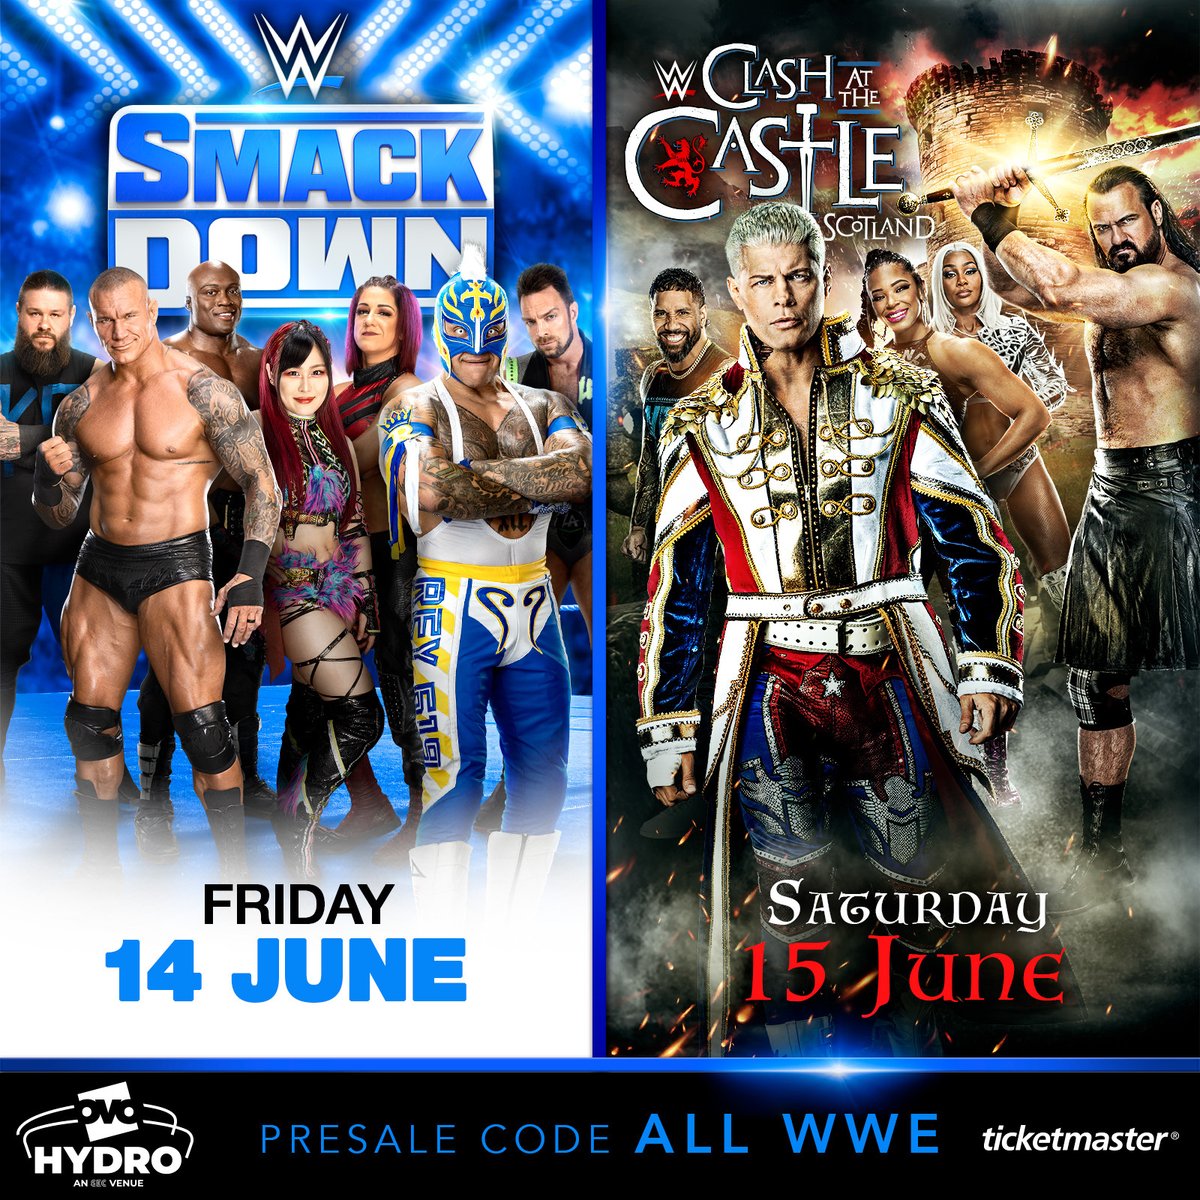 Combo ticket presale for #WWECastle is LIVE now! Unlock your access to #SmackDown and Clash at the Castle in Glasgow, Scotland, at the iconic @OVOHydro Use code ALLWWE to secure your seats! Tickets: ticketmaster.co.uk/event/36006089…